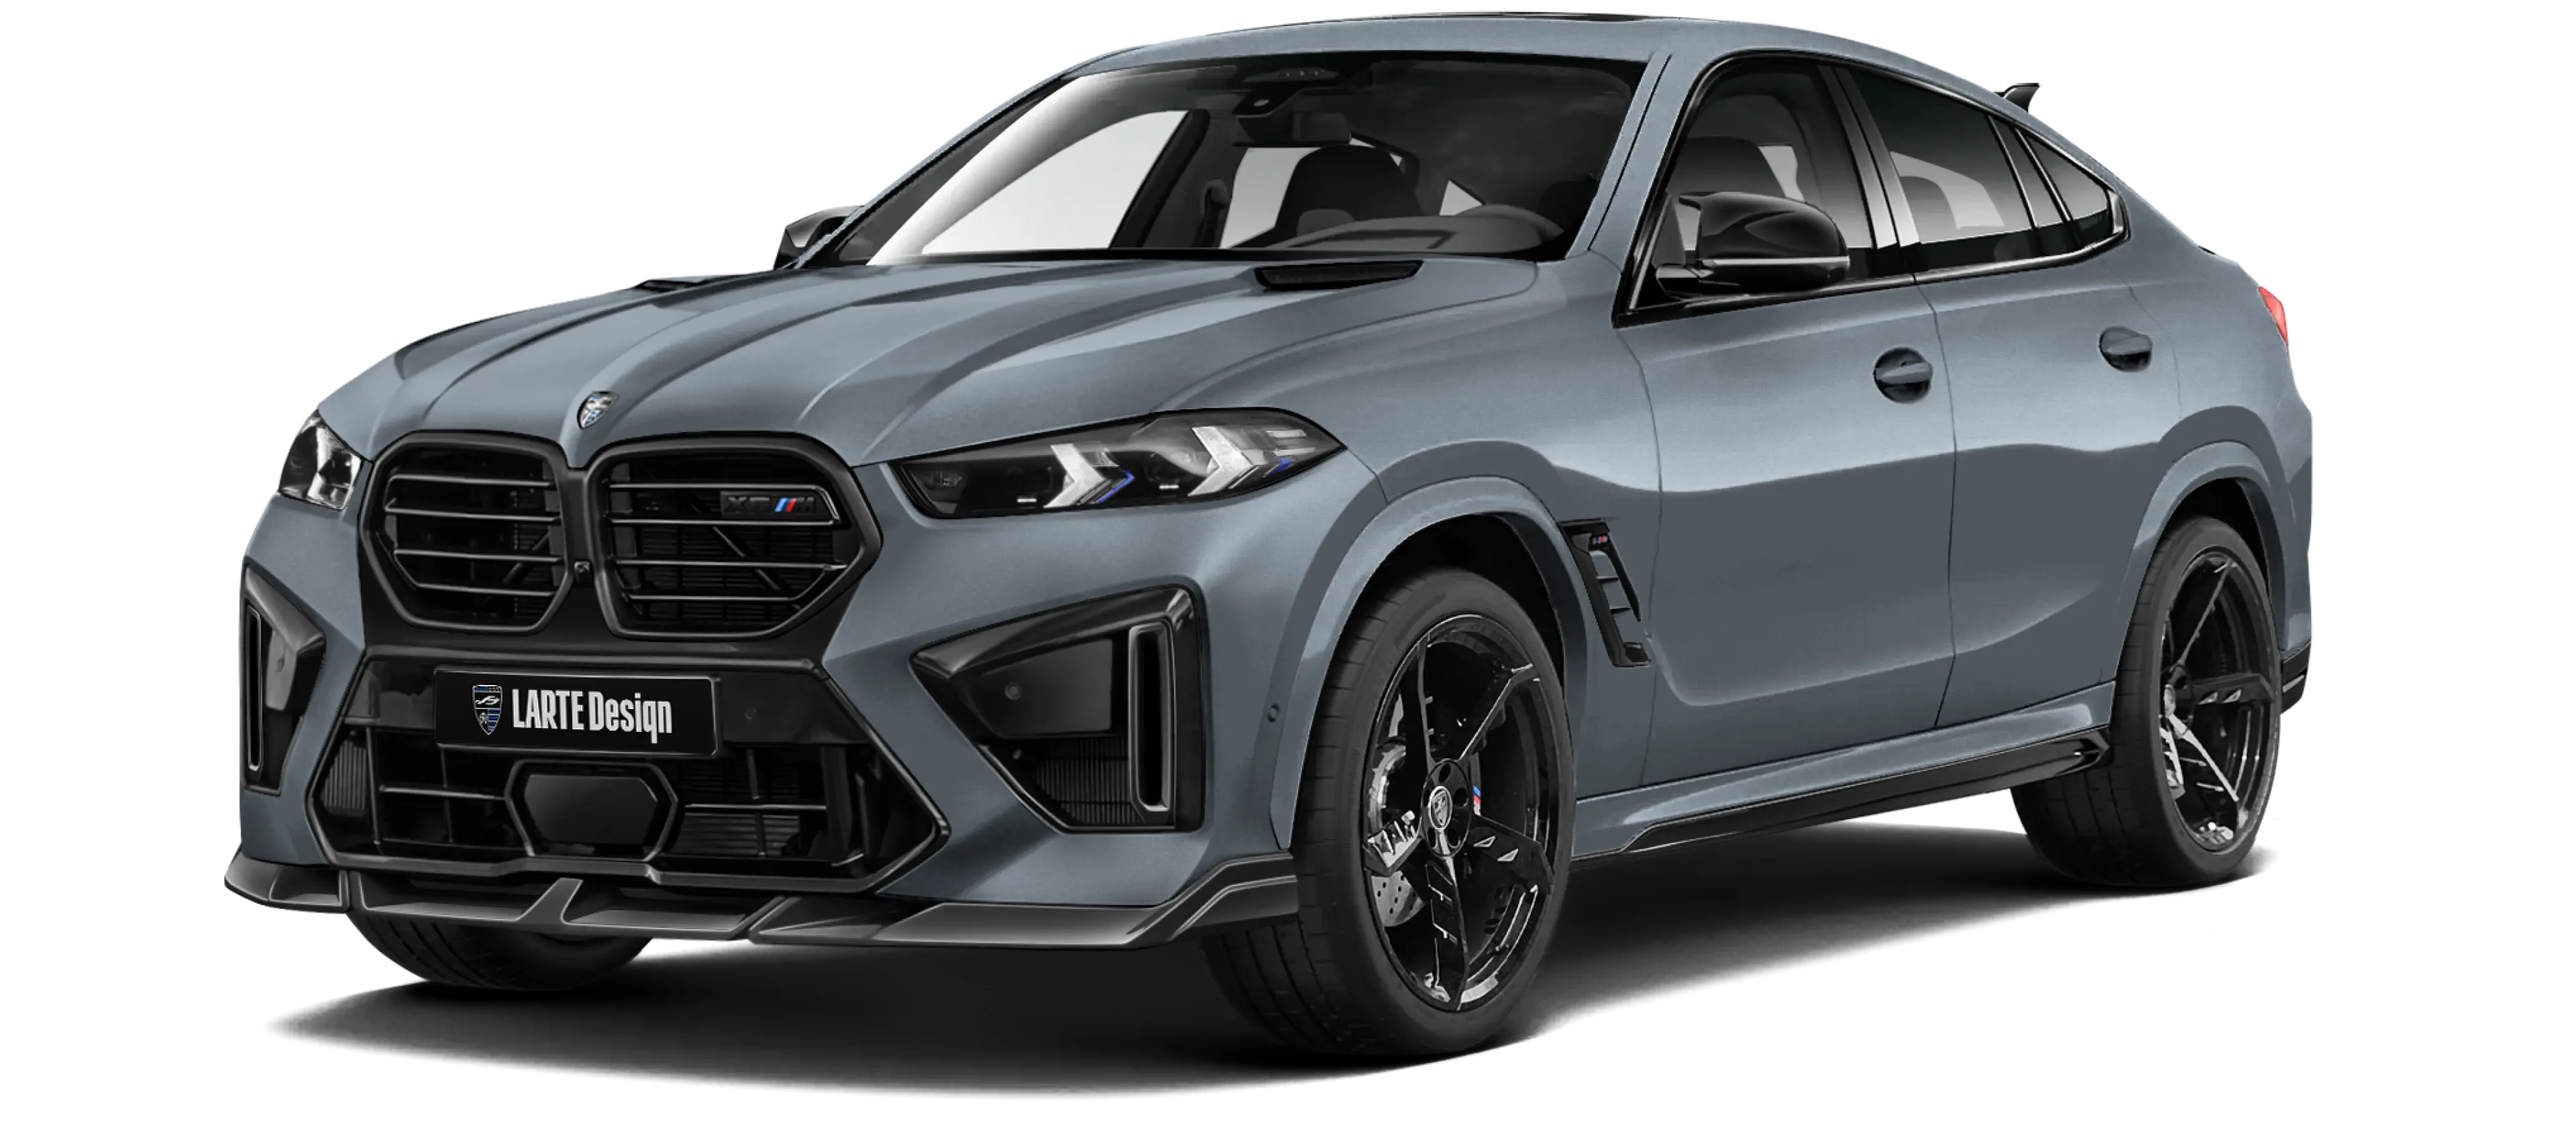 BMW X6M F96 LCI 2023 with painted body kit: front view shown in Frosty clean gray